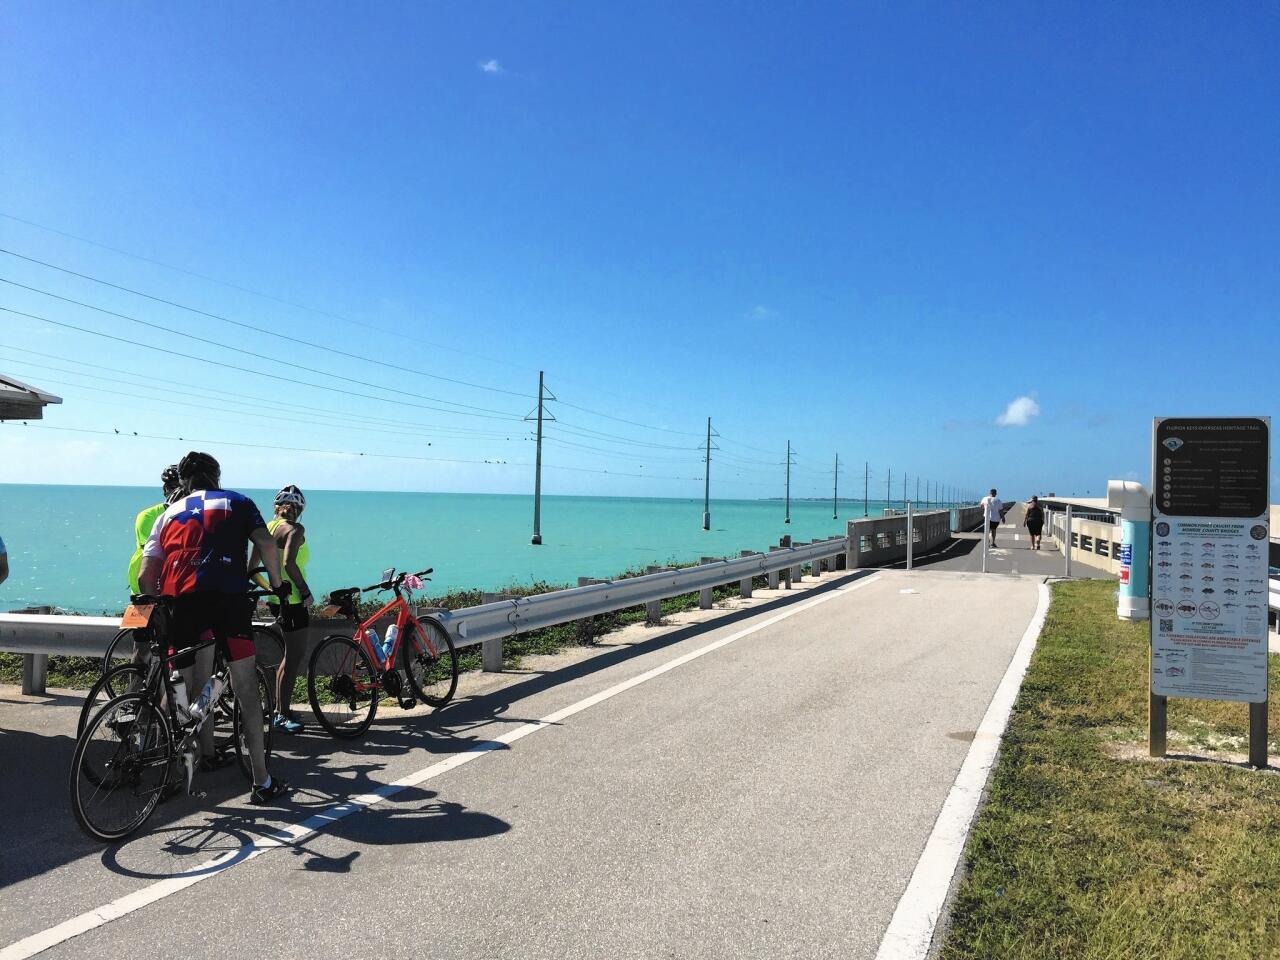 Cyclists take a break before heading onto Long Key Viaduct, one of the most scenic stretches of the ride. Cars travel on a bridge built parallel to the bike and pedestrian path.